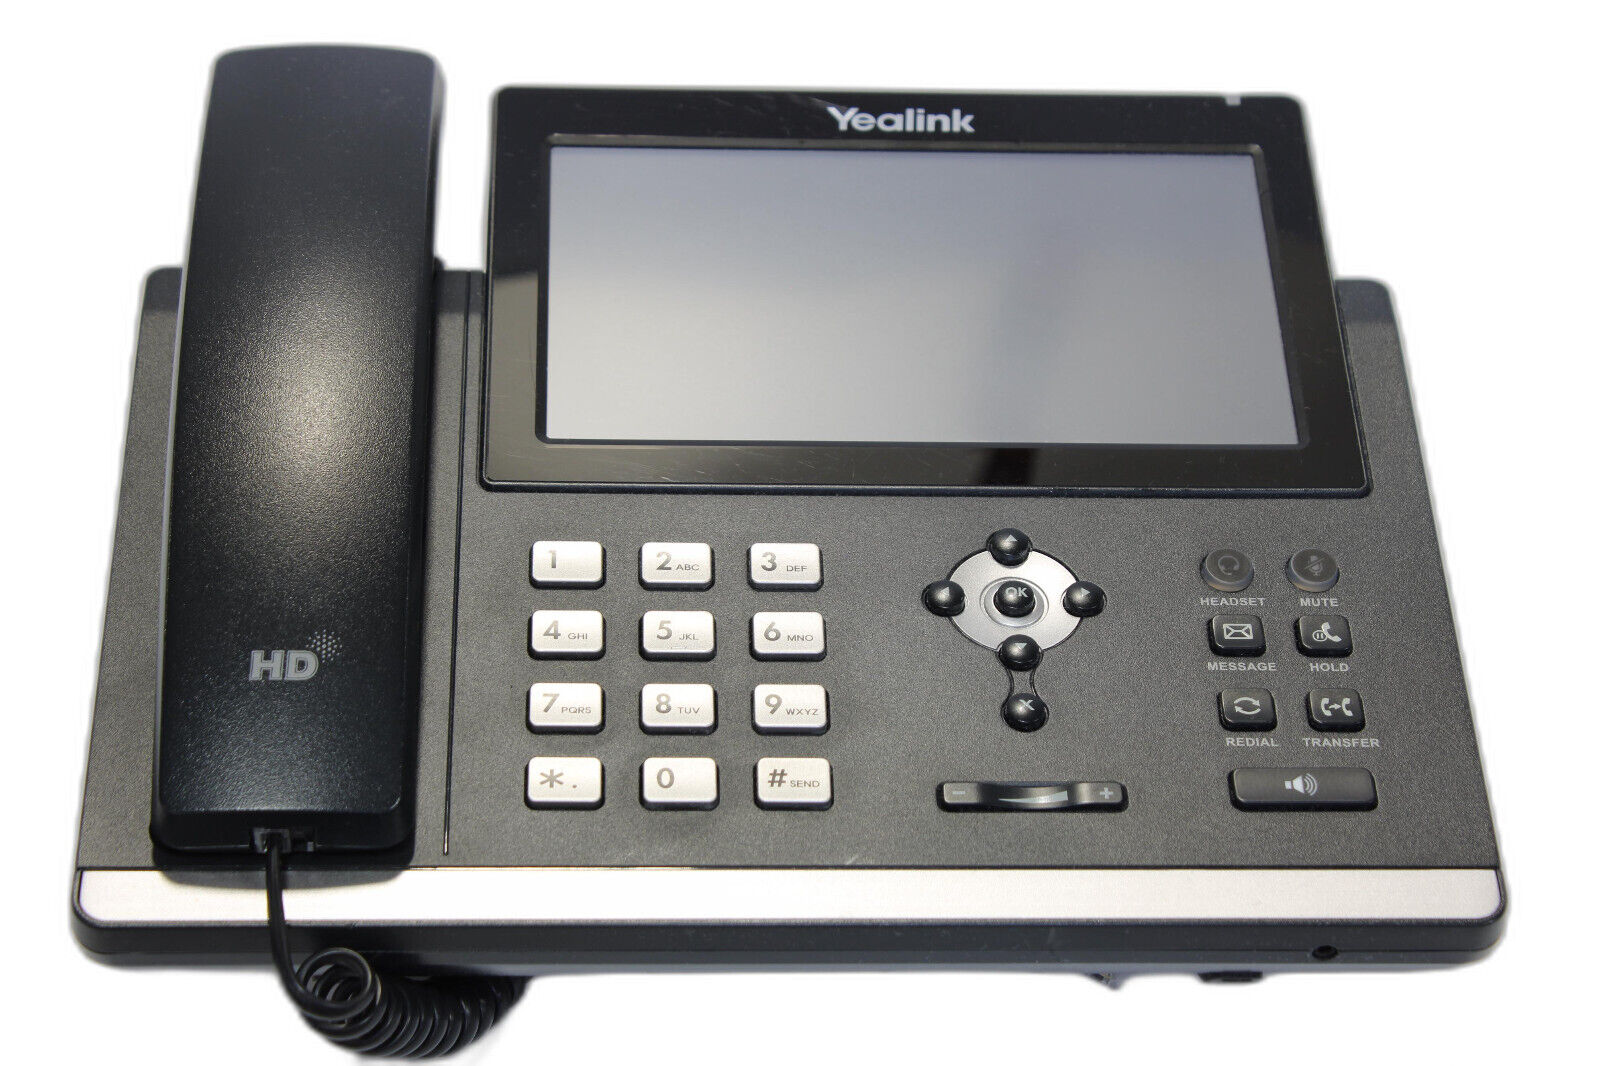 Yealink SIP-T48U Ultra-Elegant 16 Lines 7-inch Touch Screen Business VoIP Phone